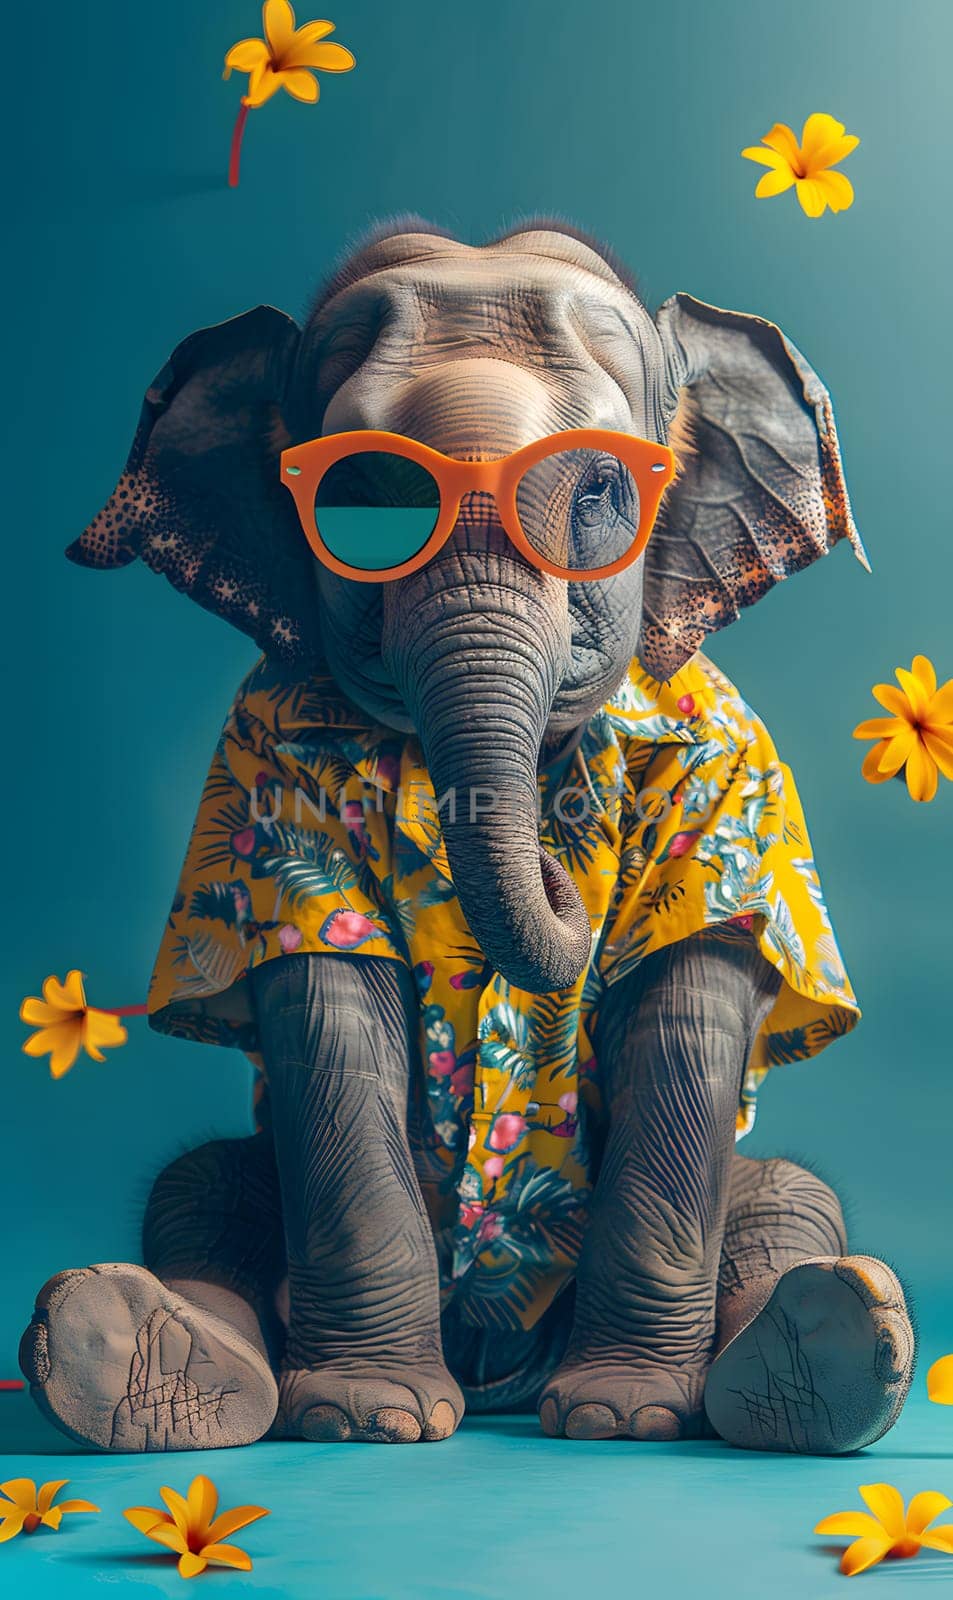 Happy elephant in sunglasses and yellow shirt sits next to flowers by Nadtochiy